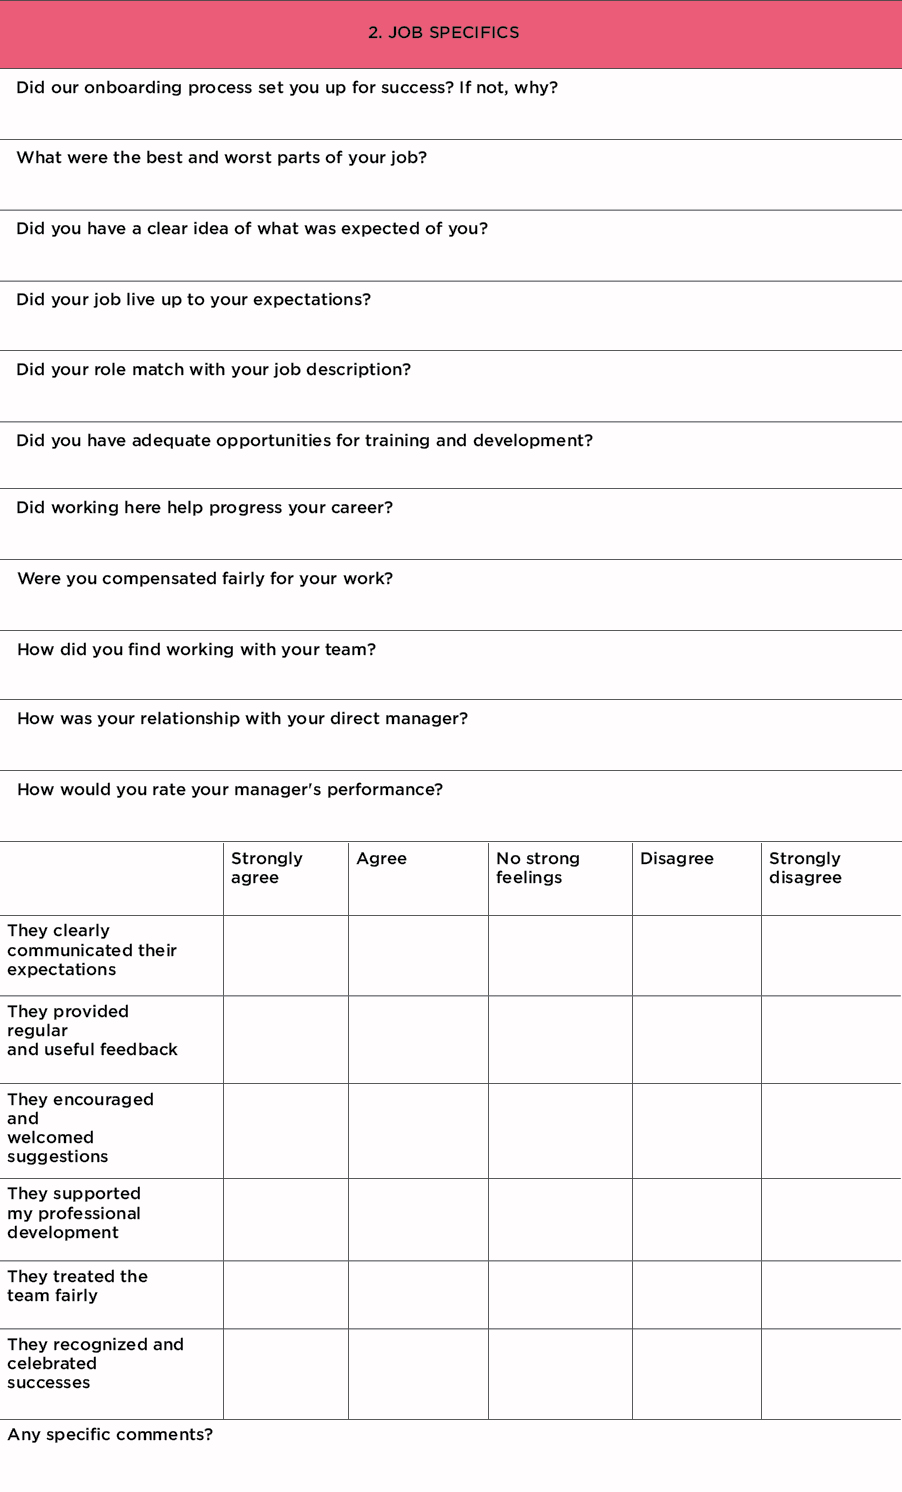 Exit Interview Form - Download PDF Document for Printing